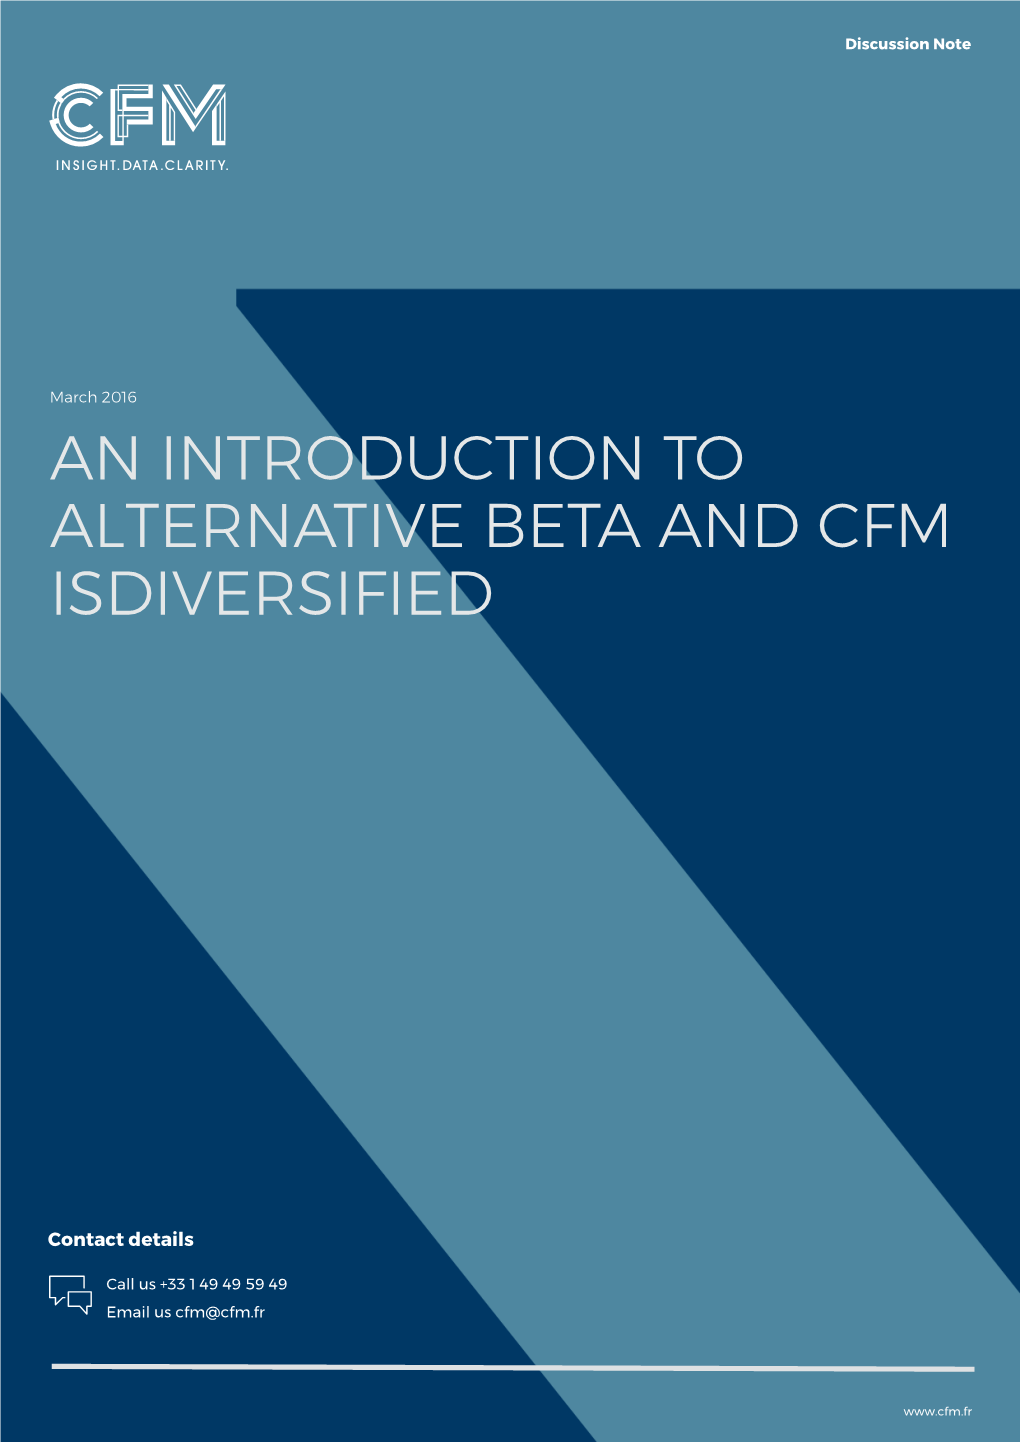 An Introduction to Alternative Beta and CFM Isdiversified